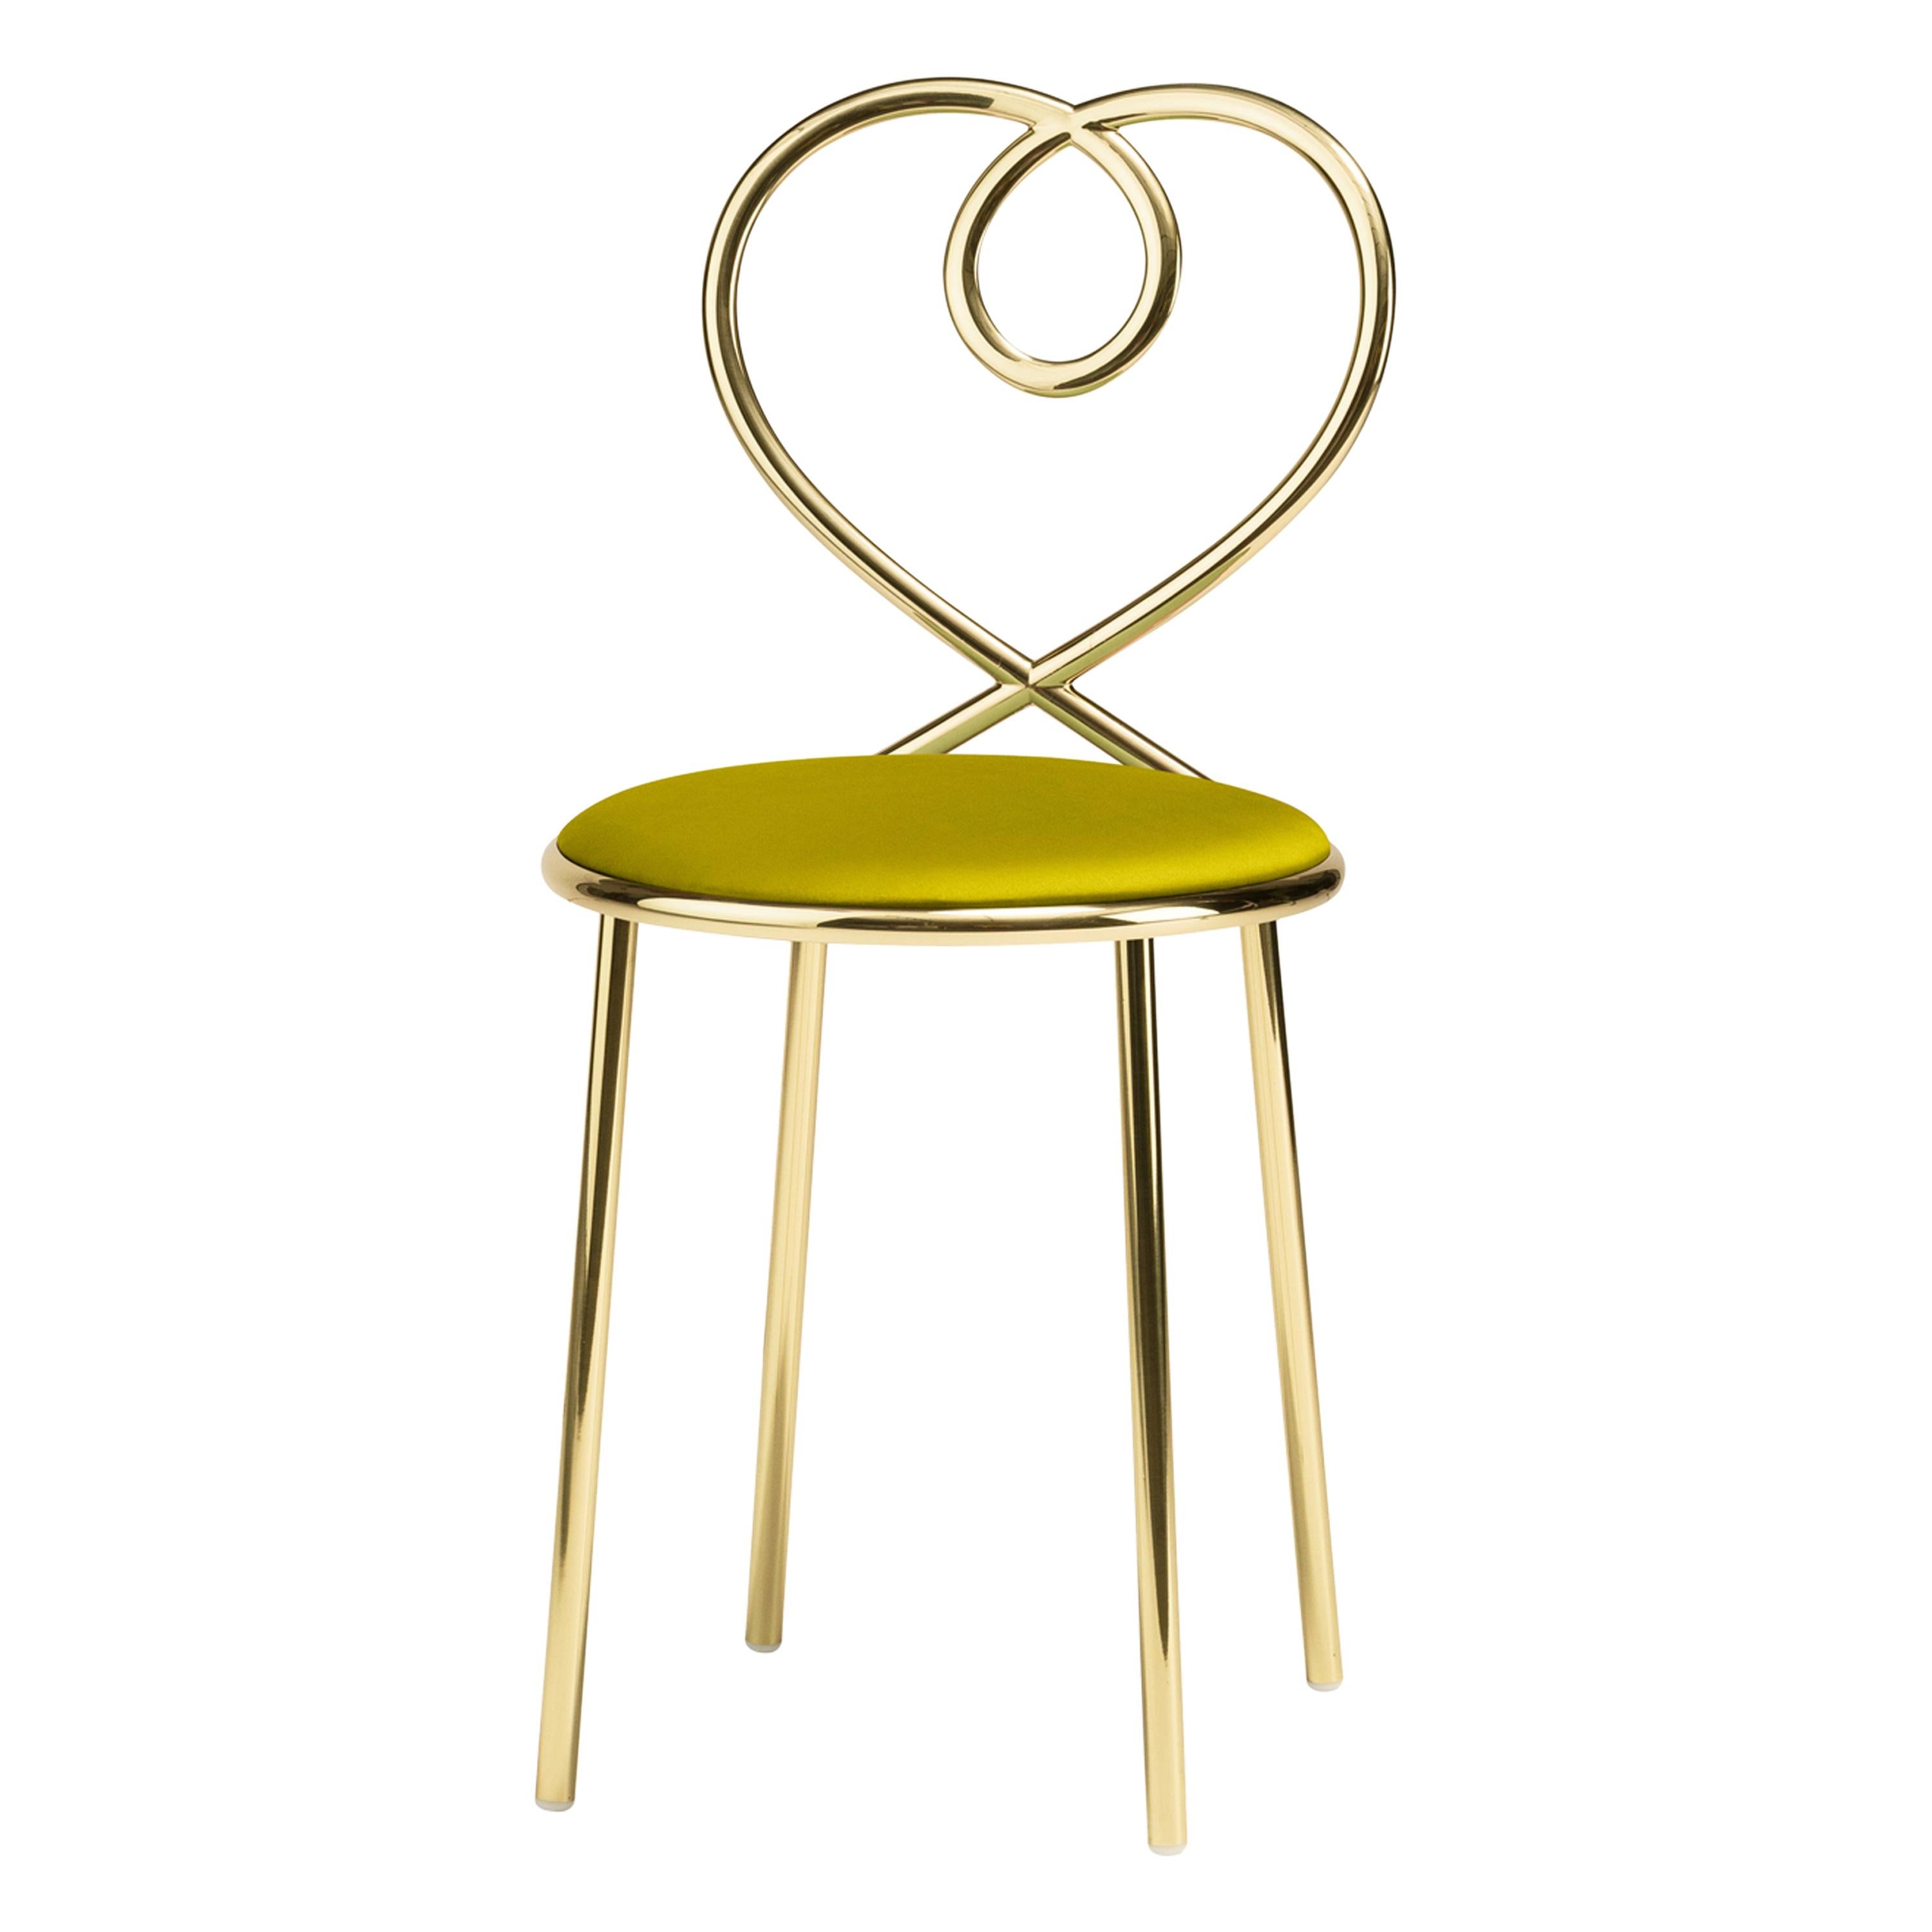 Love Chair in Anis with Polished Brass by Nika Zupanc